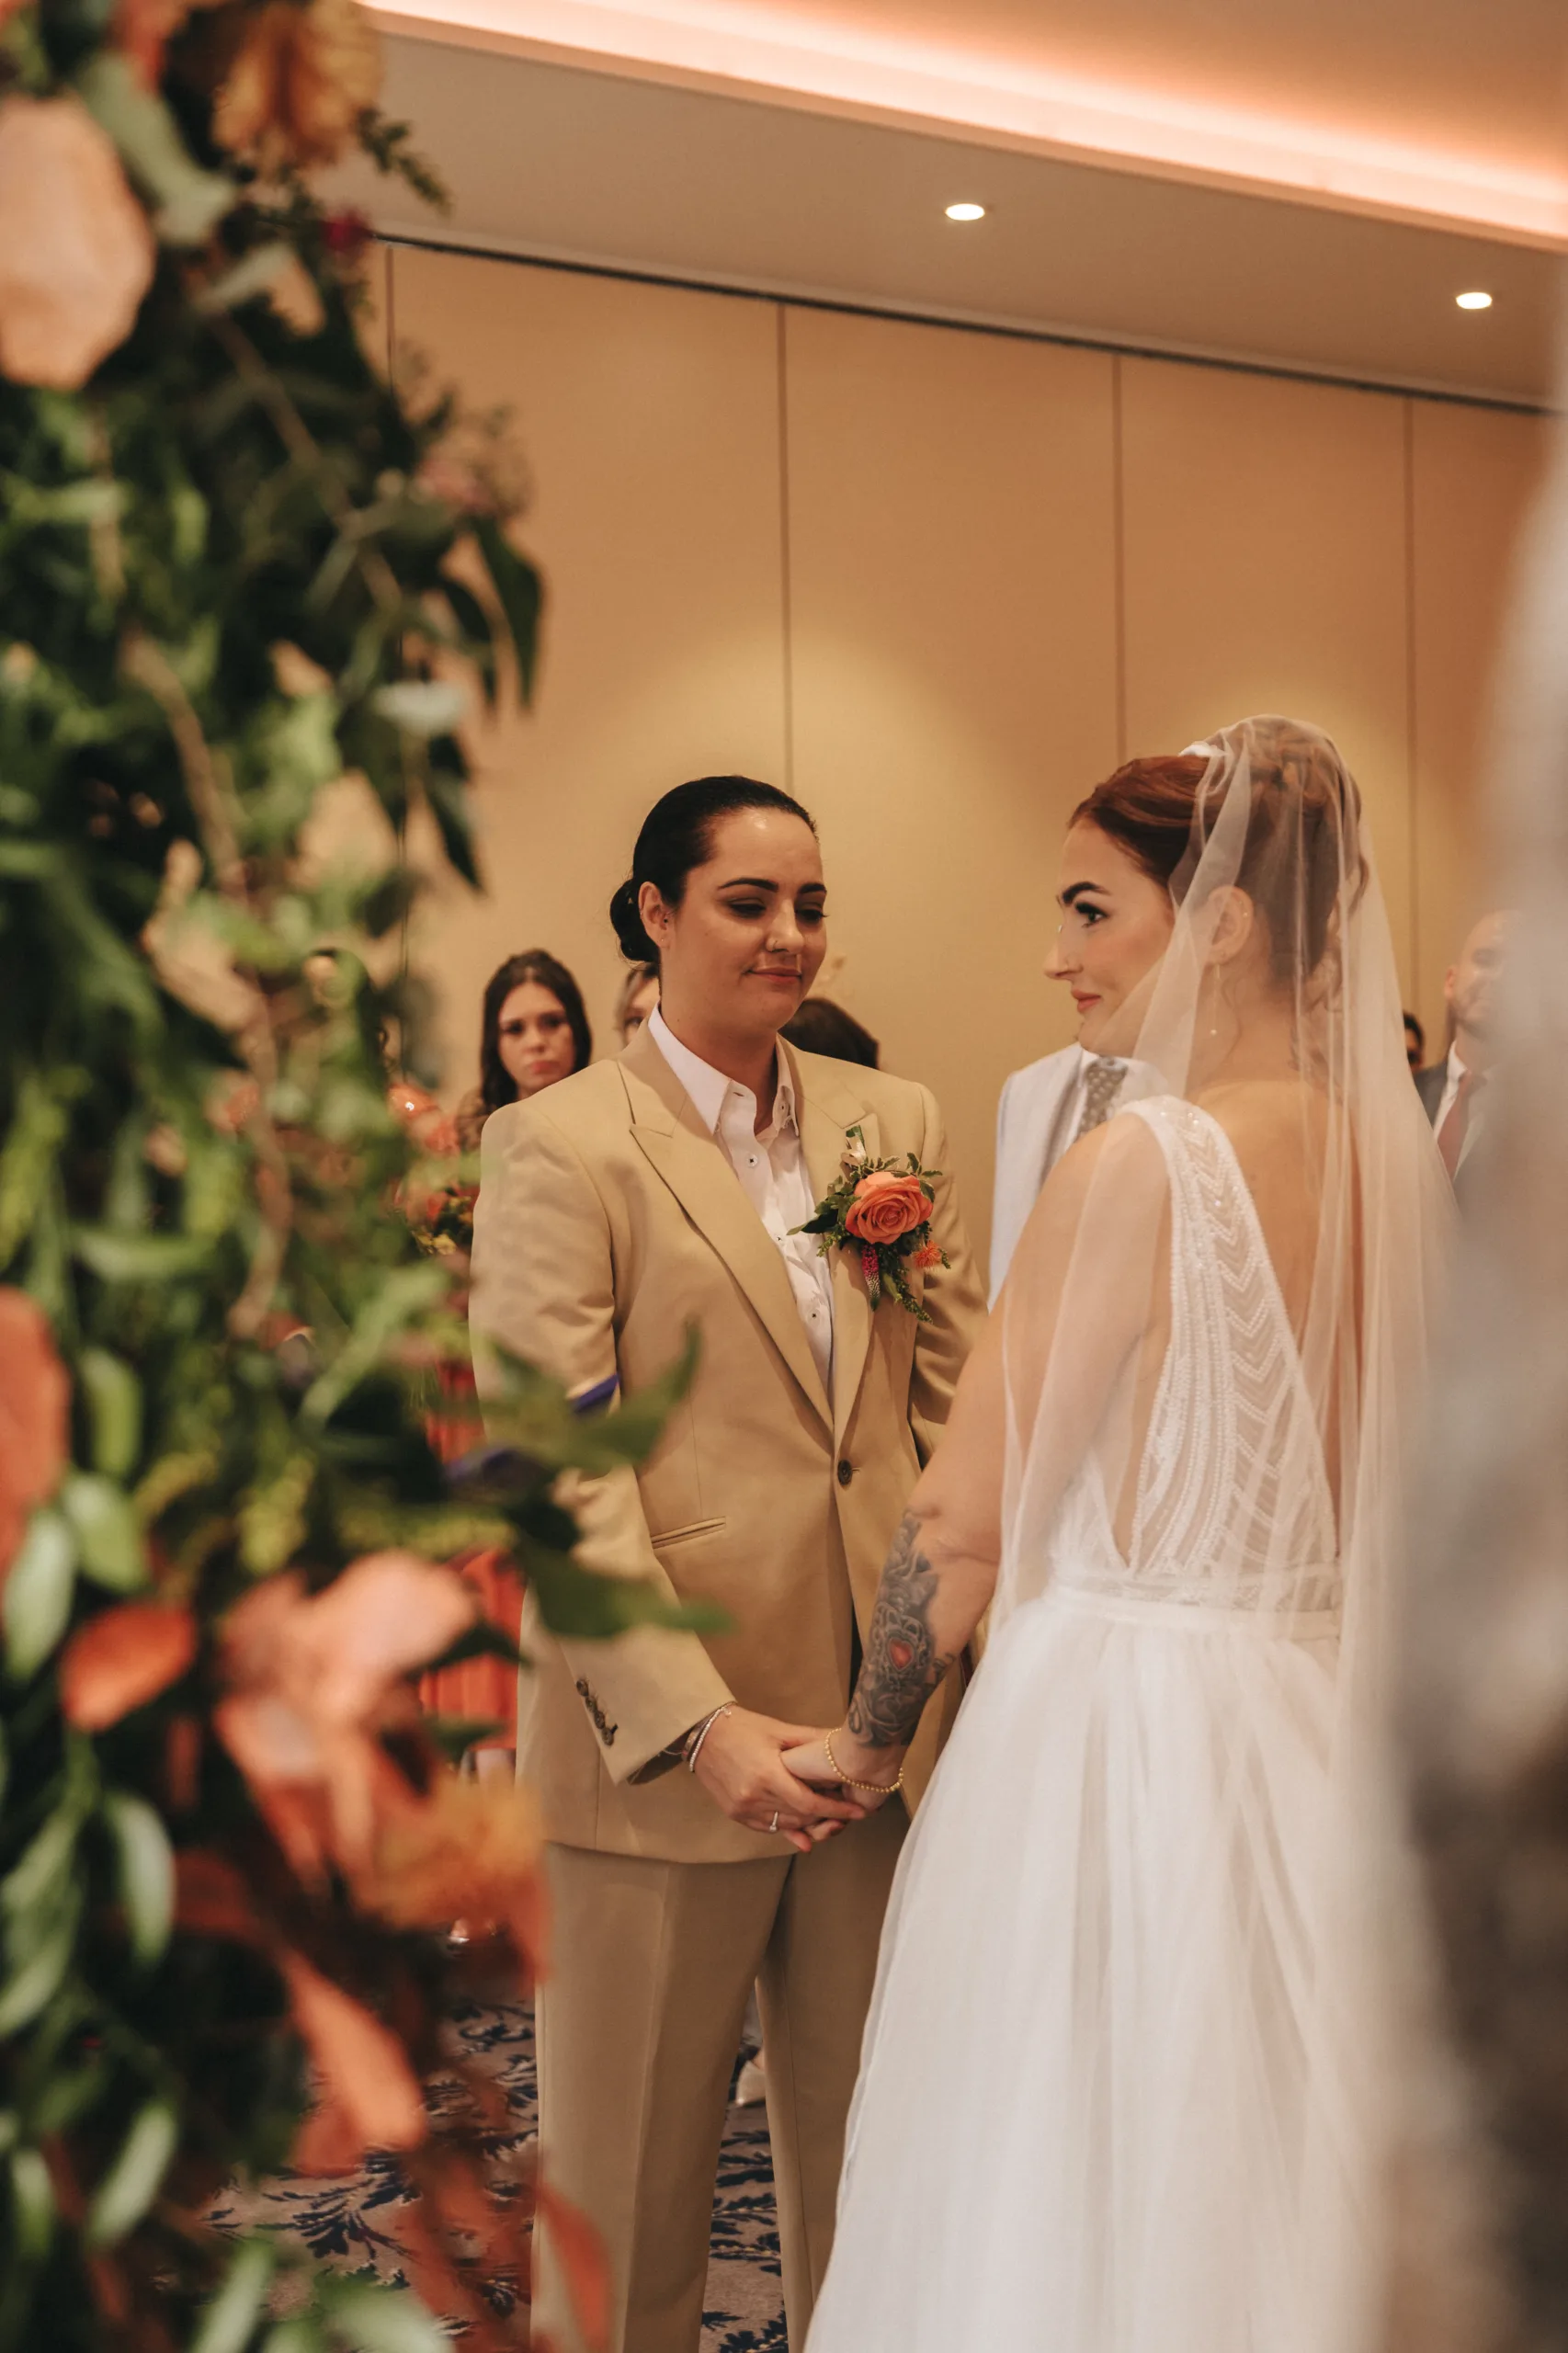 A bride and groom exchange vows at their wedding ceremony, captured by a photographer.